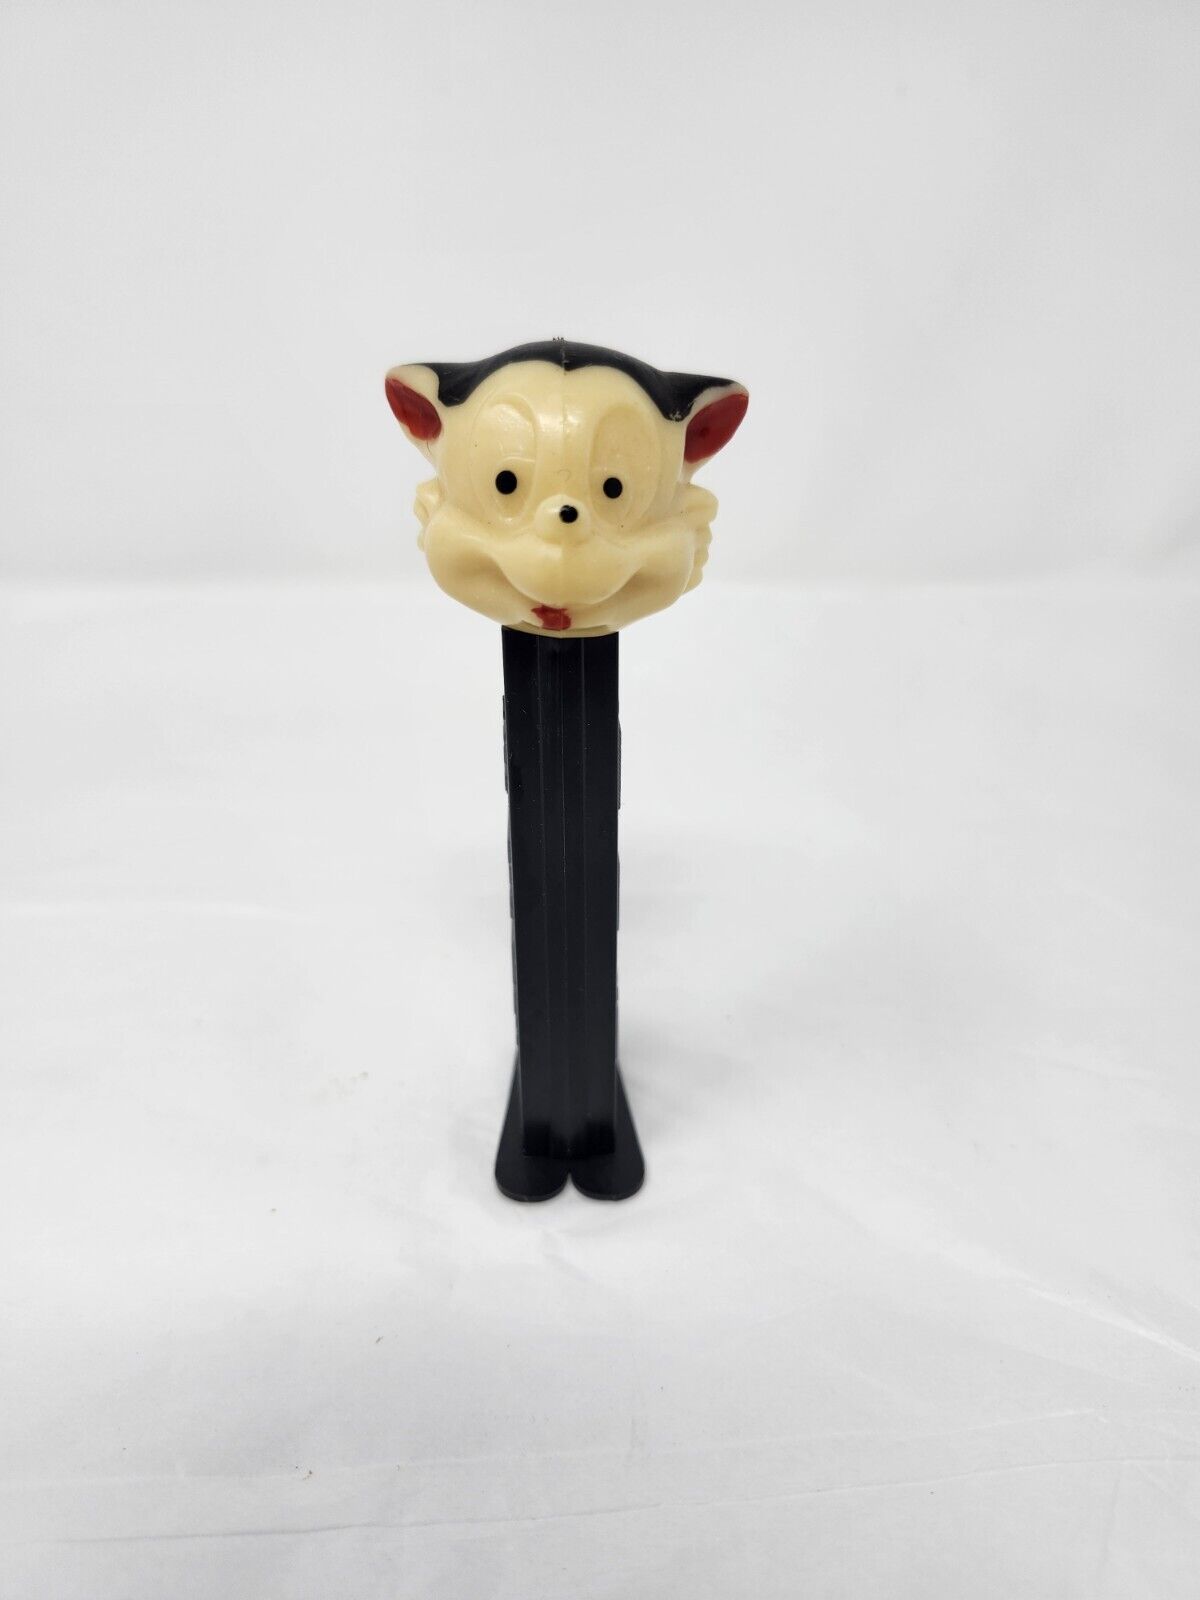 Vintage and Thin Foot Lil Bad Wolf Pez 3.9 Patent #.  Black Stem Disney Late 70s